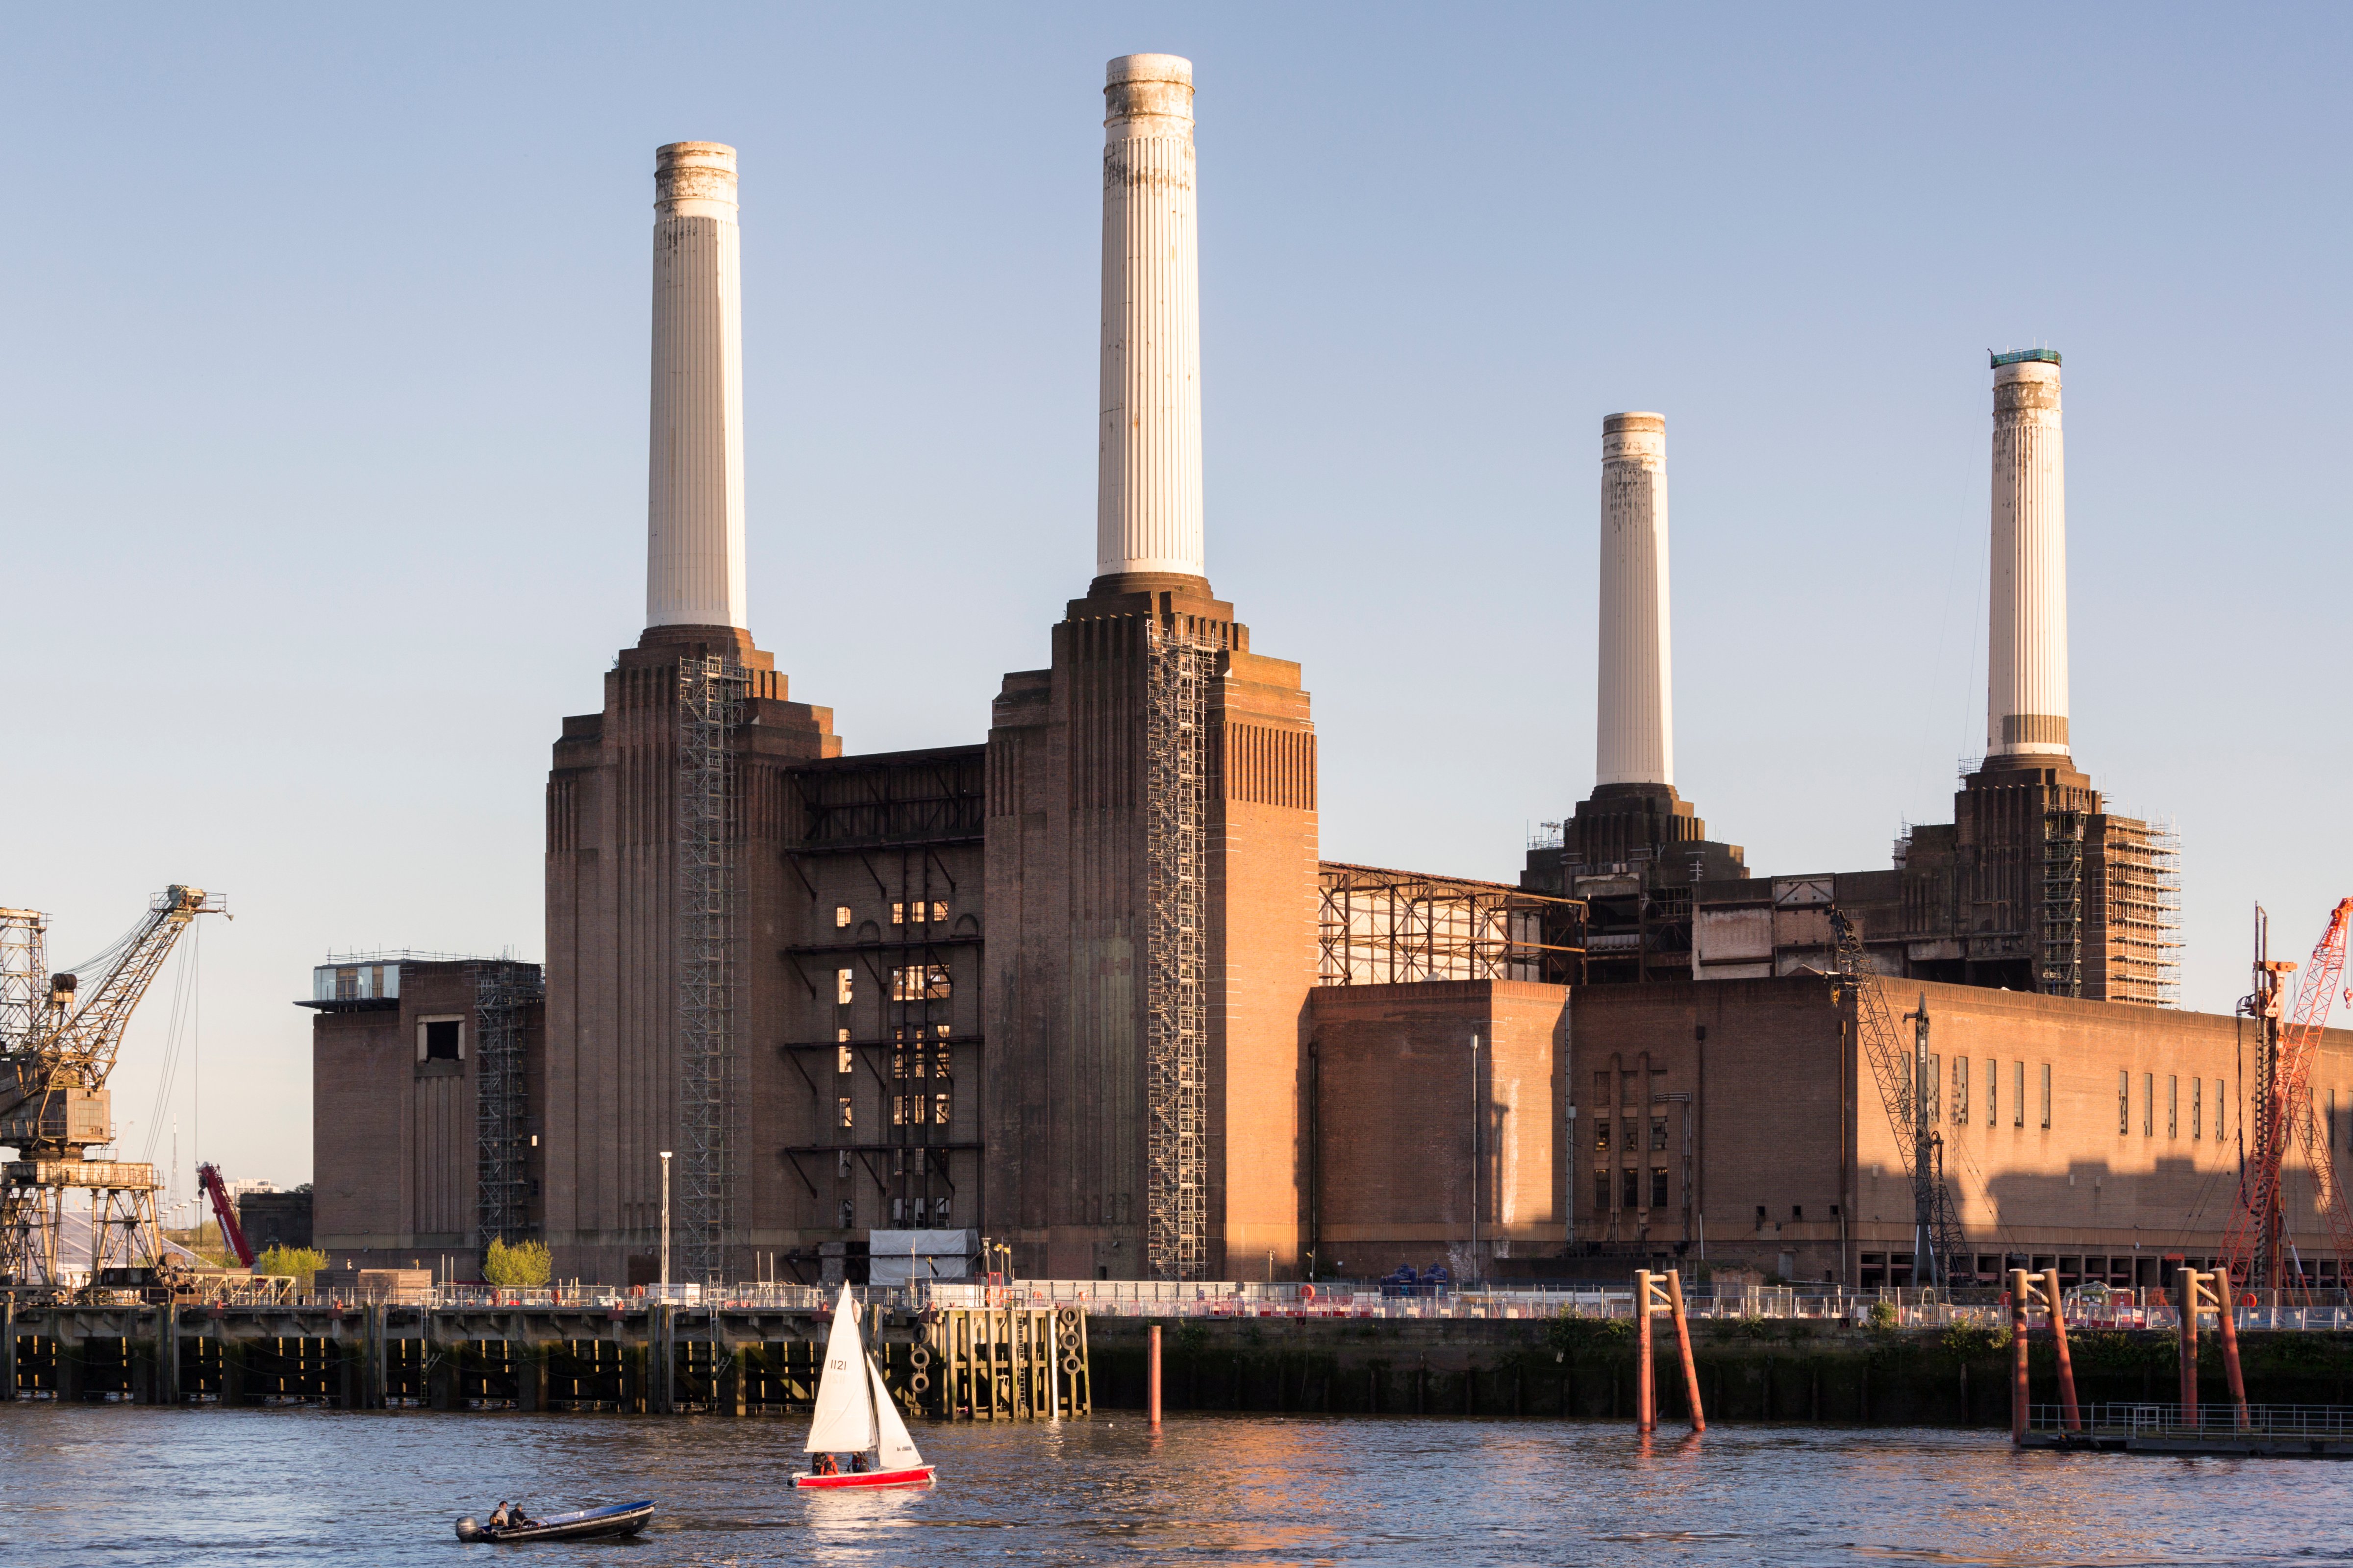 One of the biggest London Landmarks, the Battersea Power Station, viewed from across the Thames river. (Joas Souza Photographer—Getty Images)